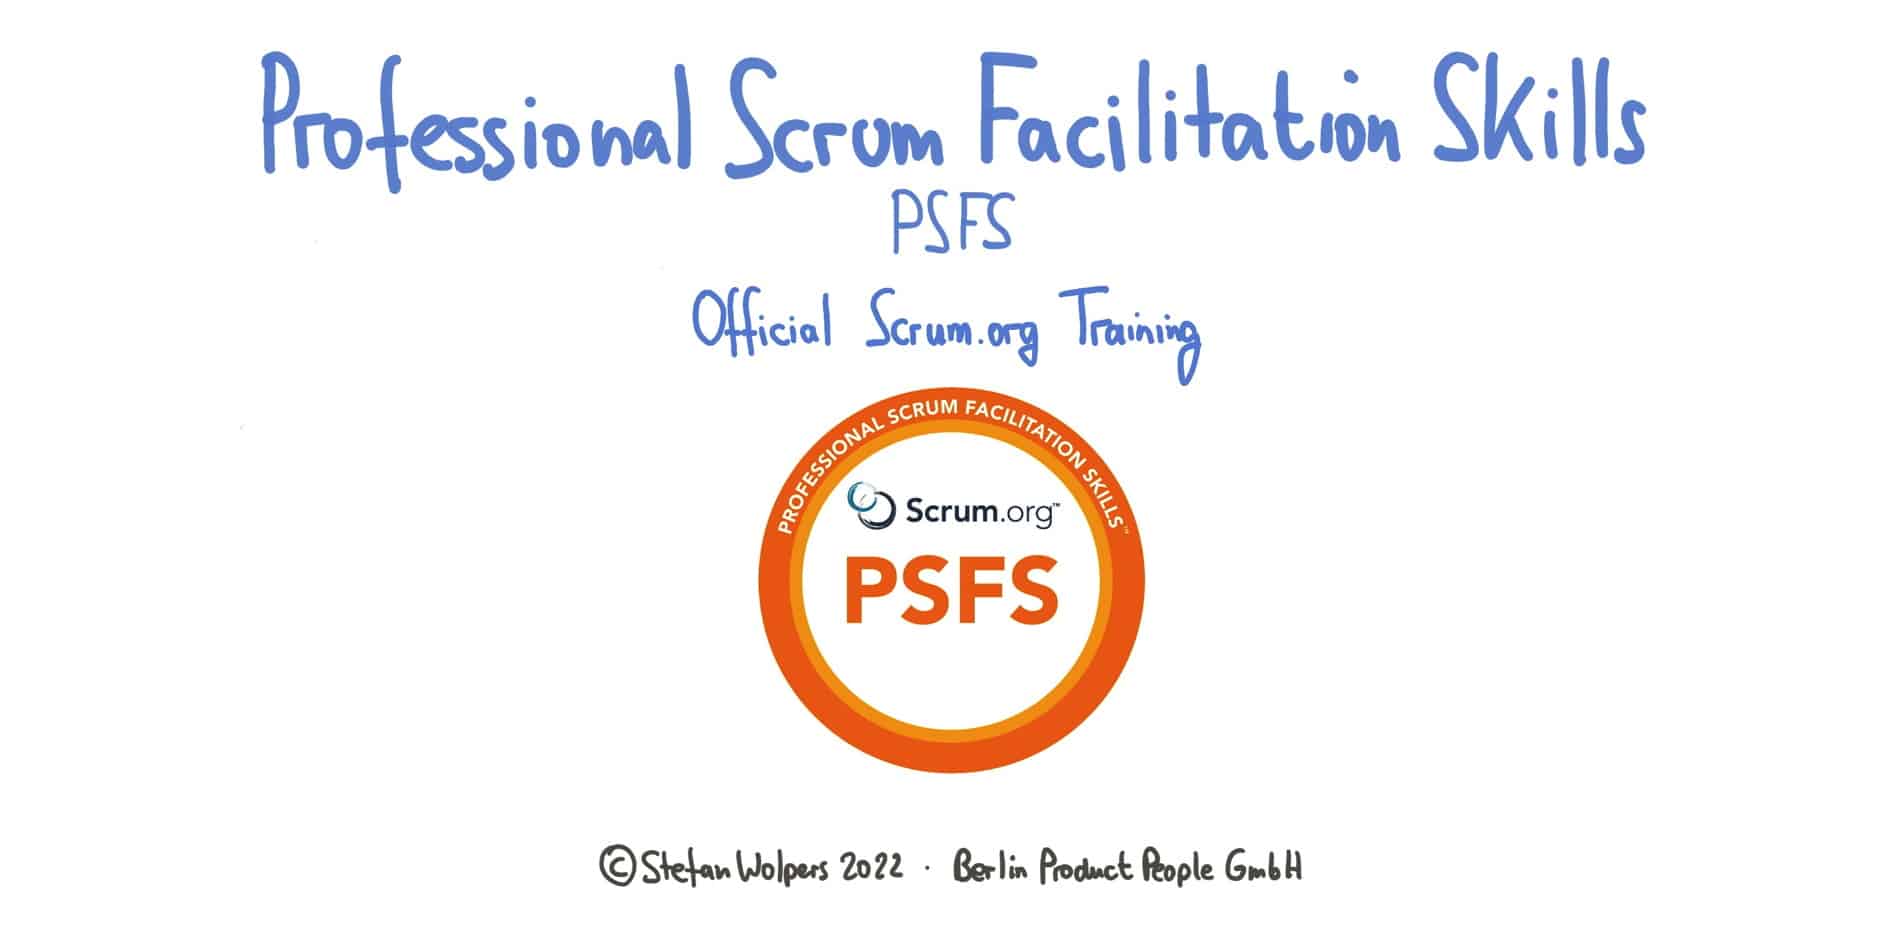 Professional Scrum Facilitation Skills Schulung (PSFS) — PST Stefan Wolpers — Berlin Product People GmbH